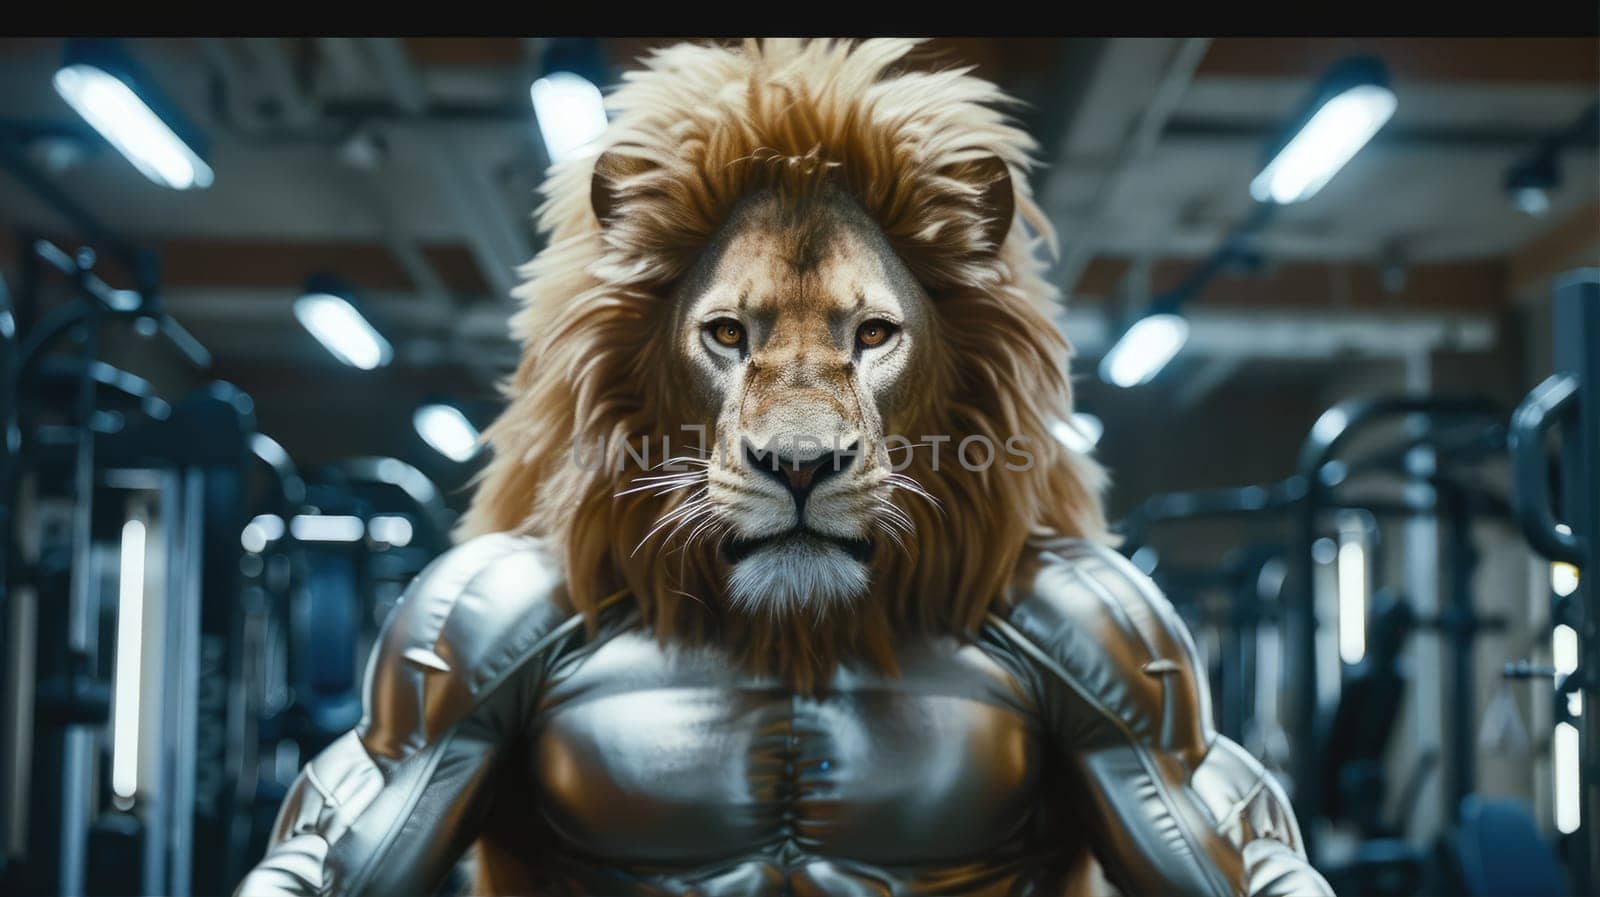 A muscular lion is standing in a gym surrounded by metal equipment by natali_brill